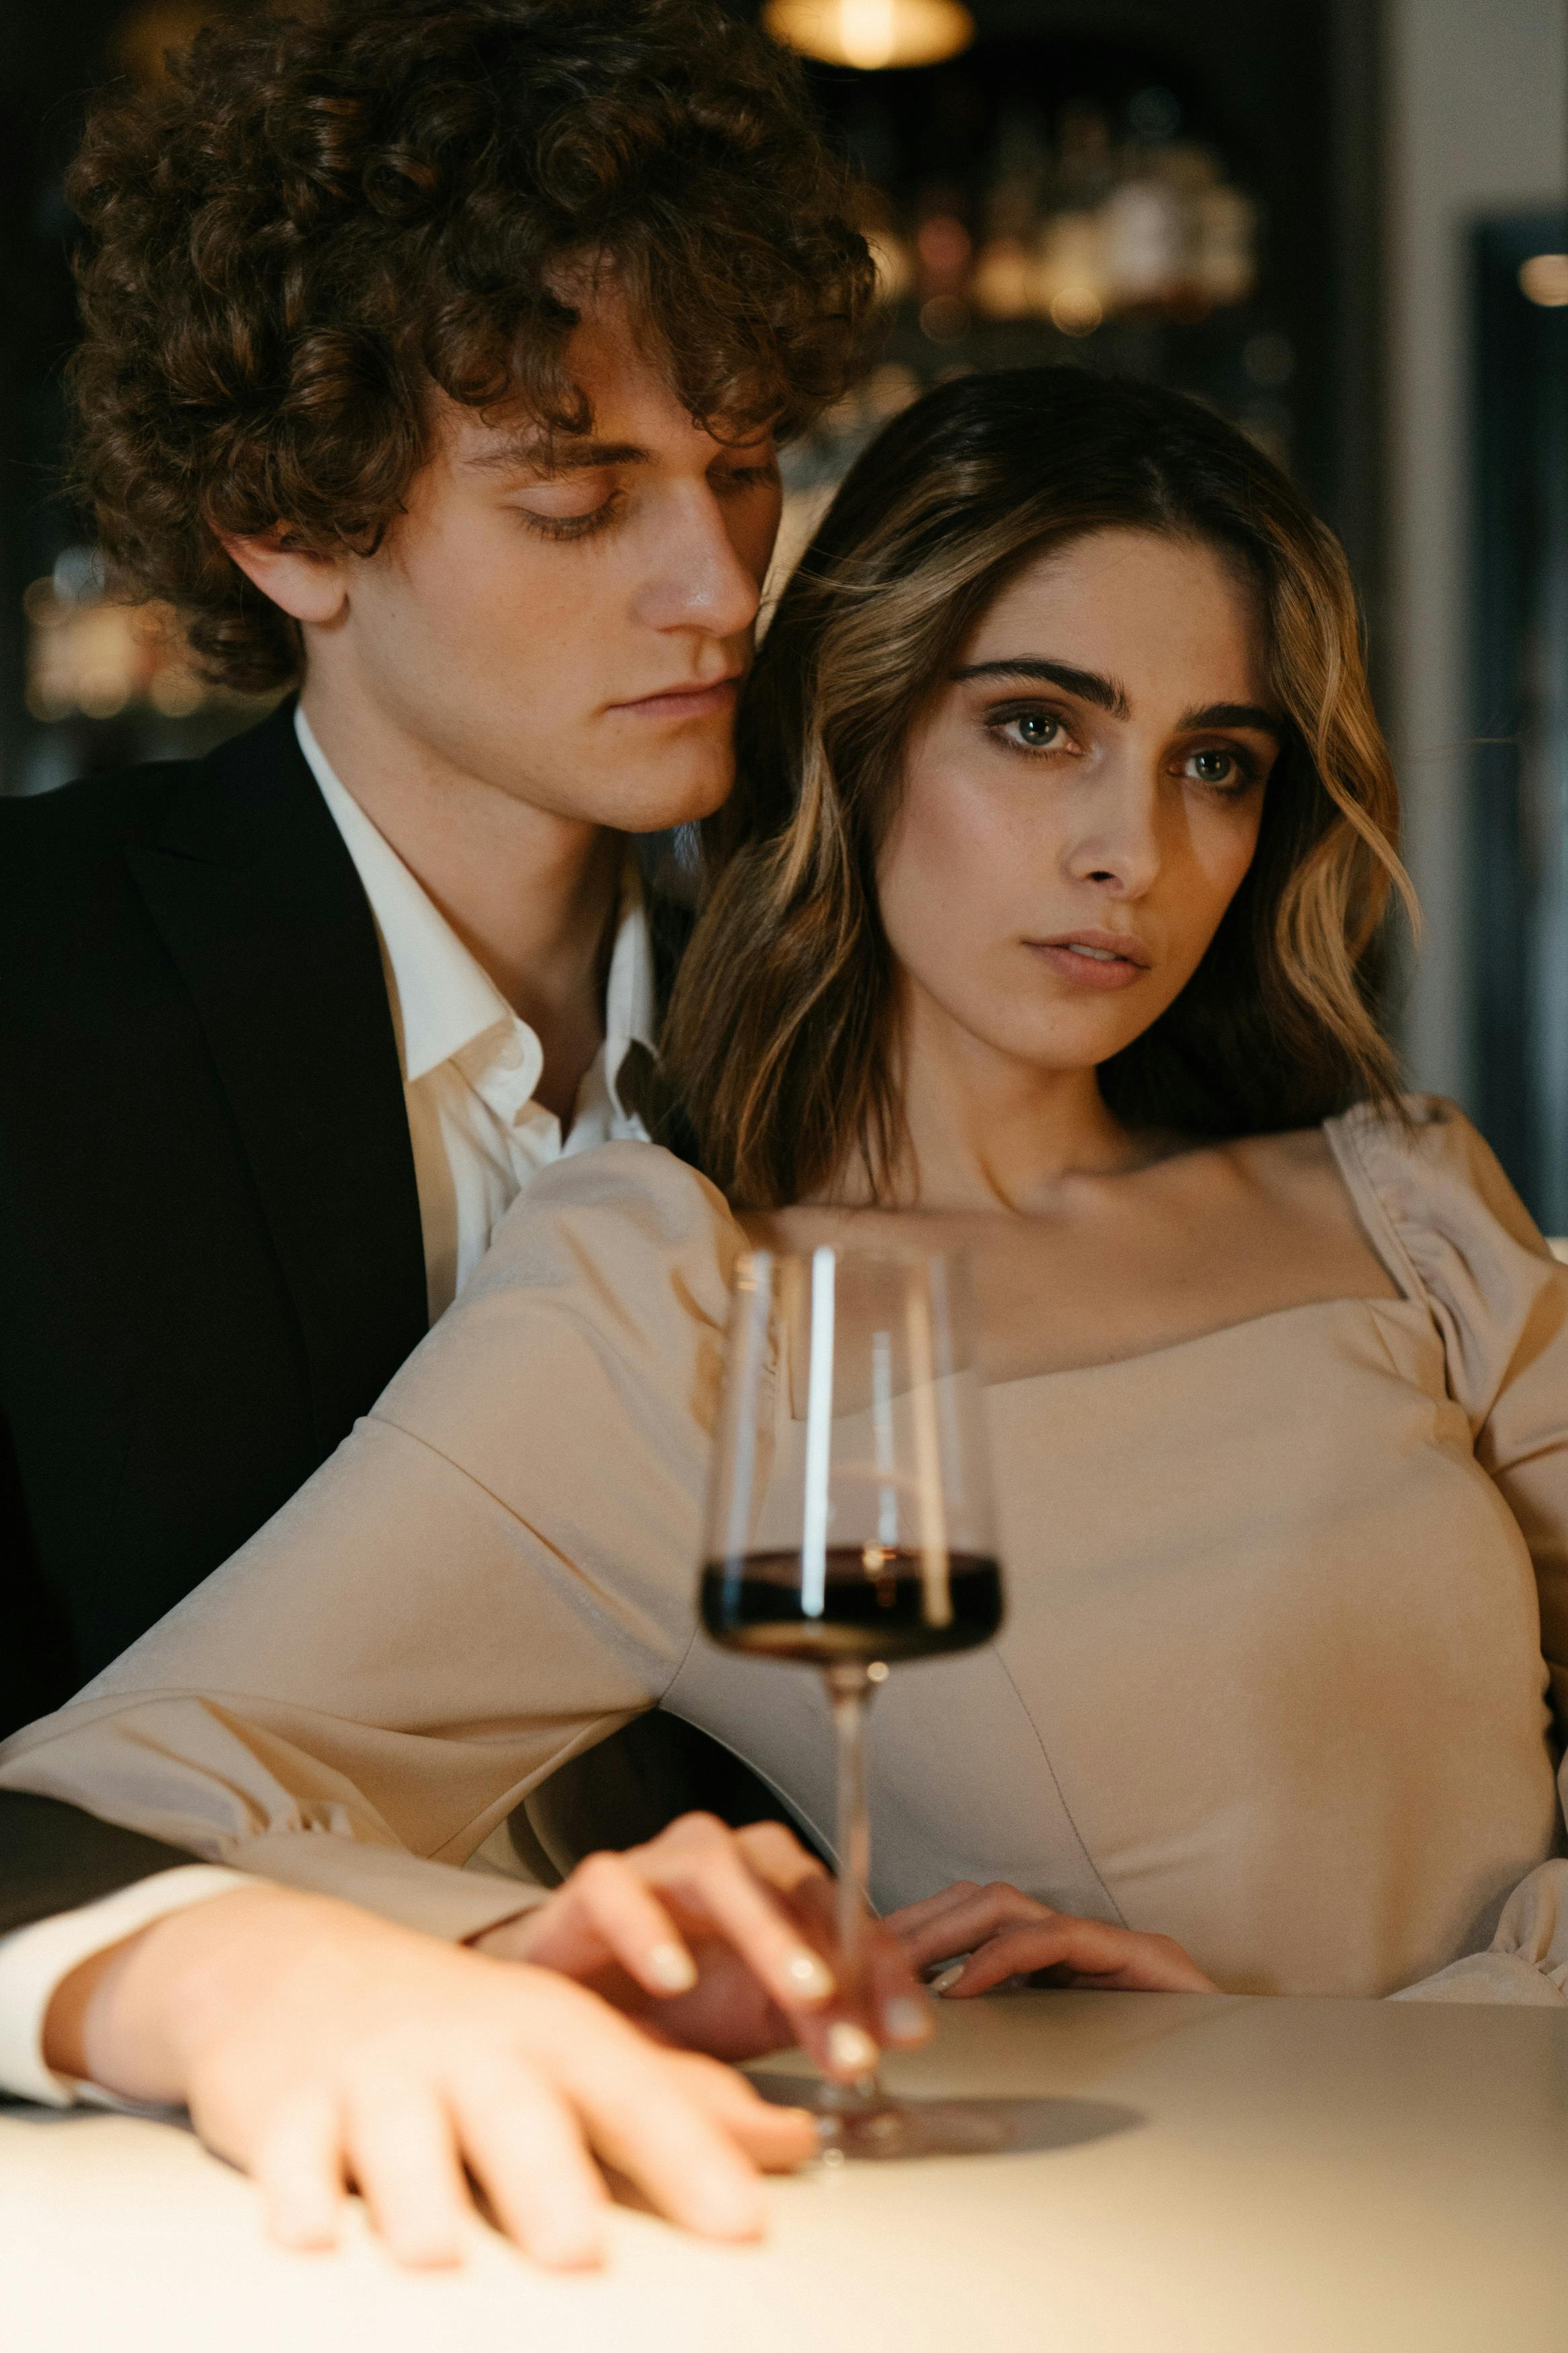 A woman leaning on her supportive man at a restaurant | Source: Pexels